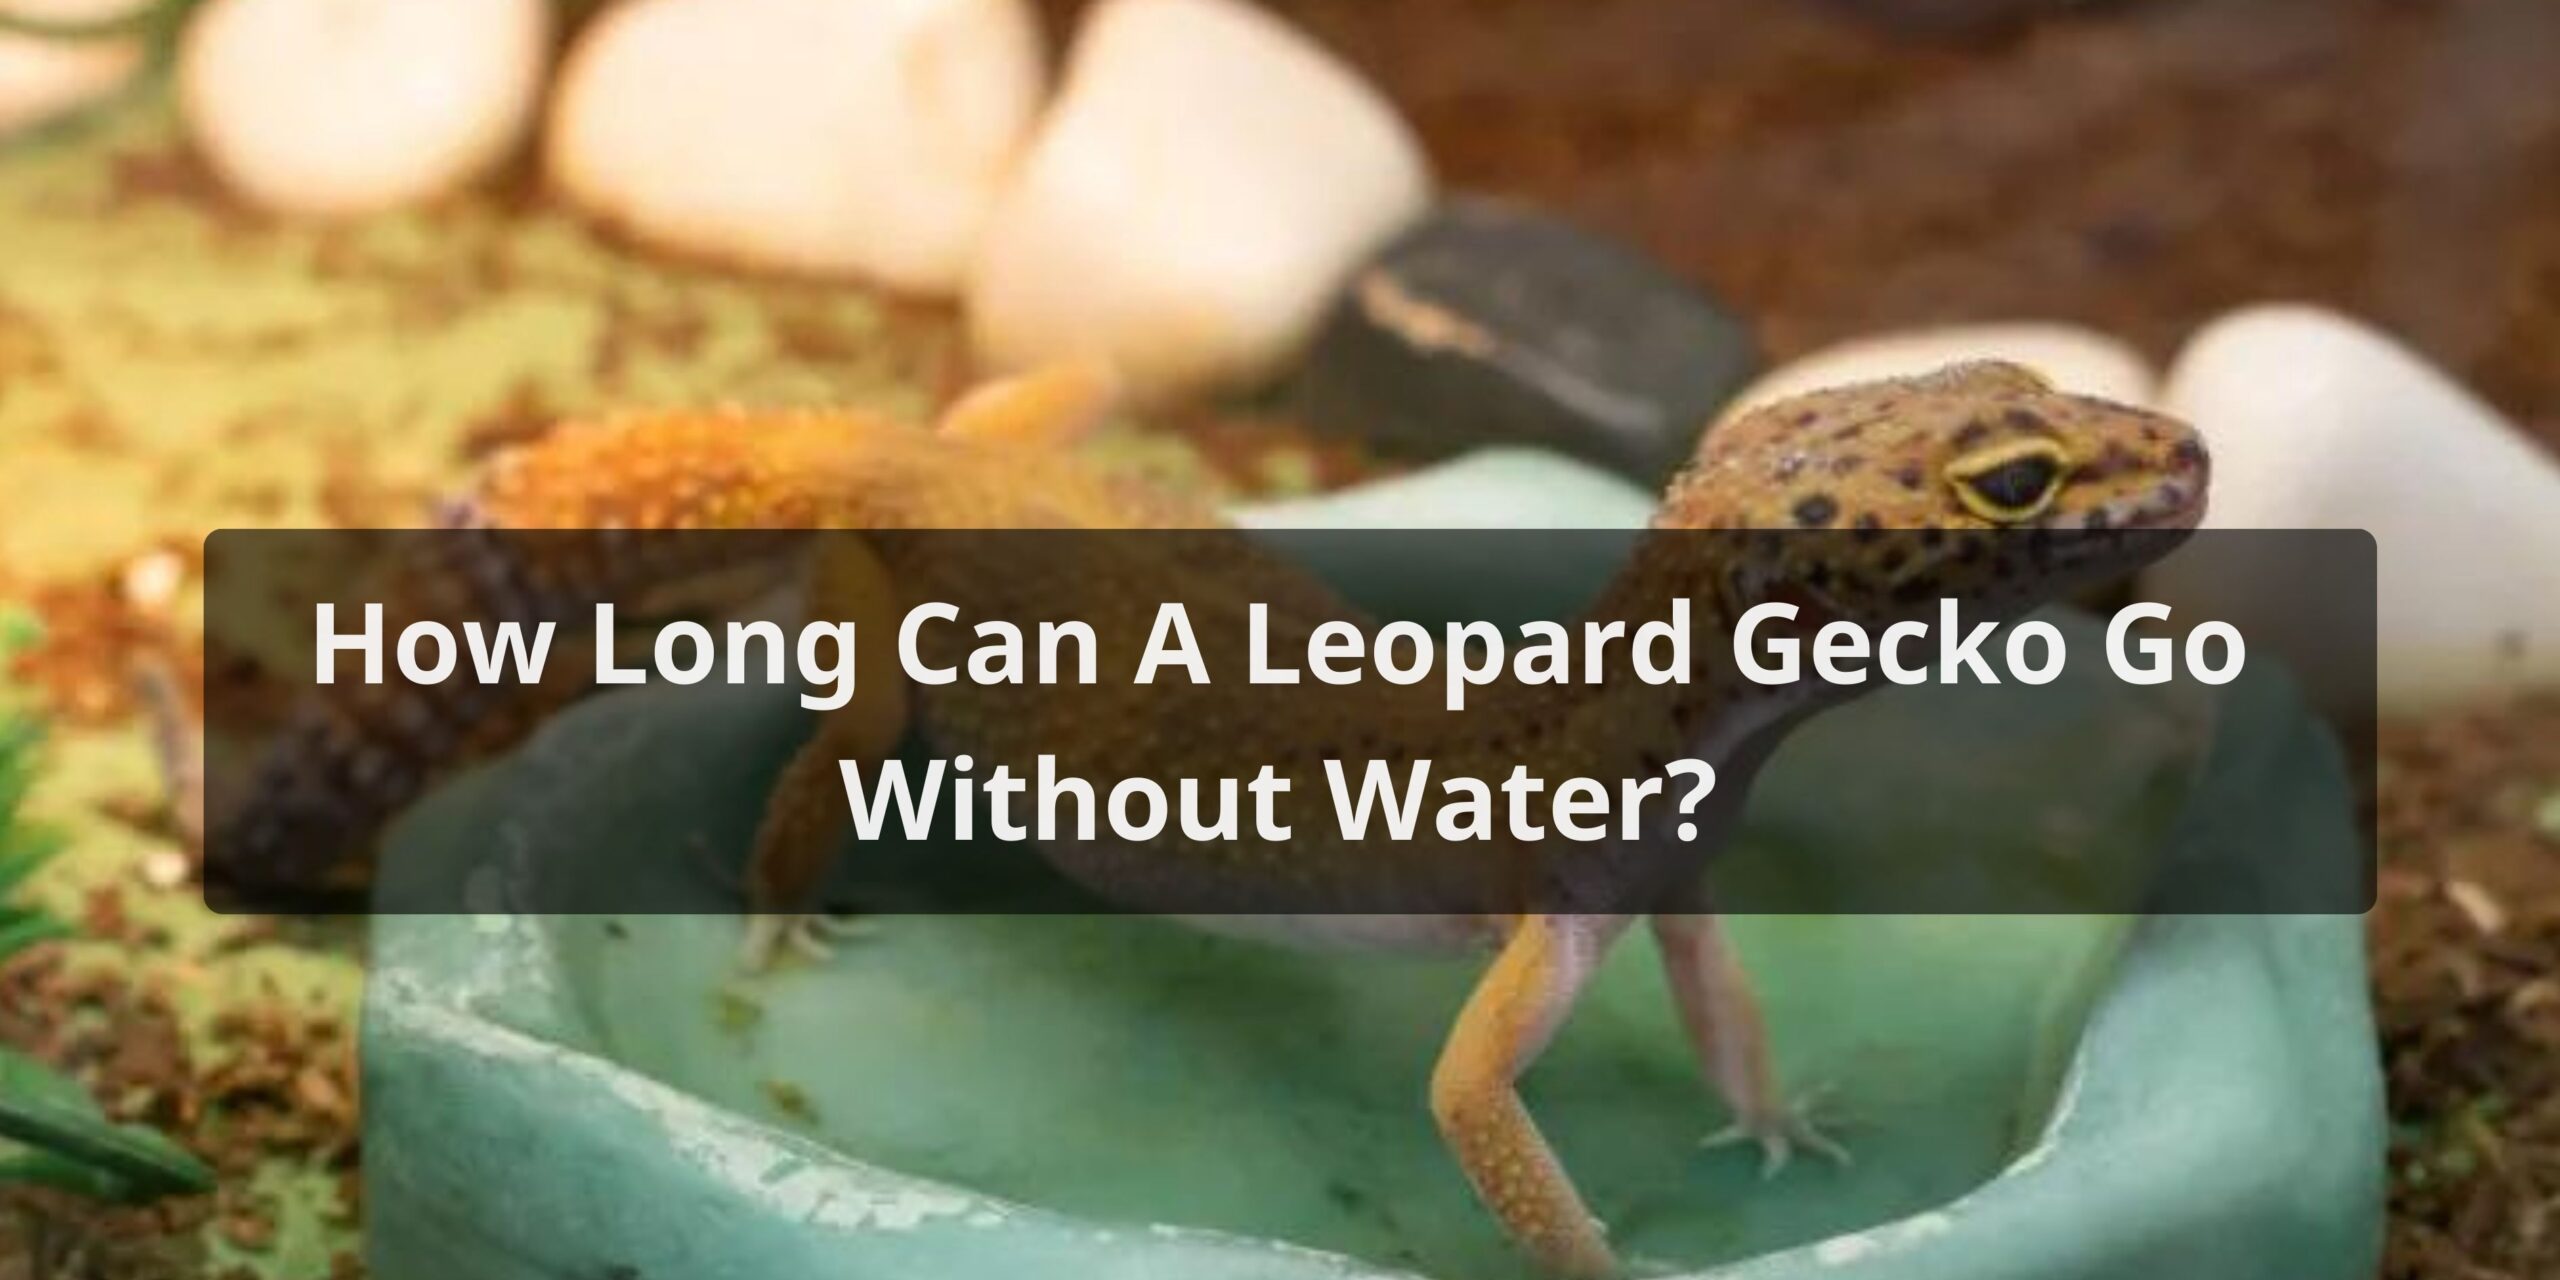 How Long Can A Leopard Gecko Go Without Water